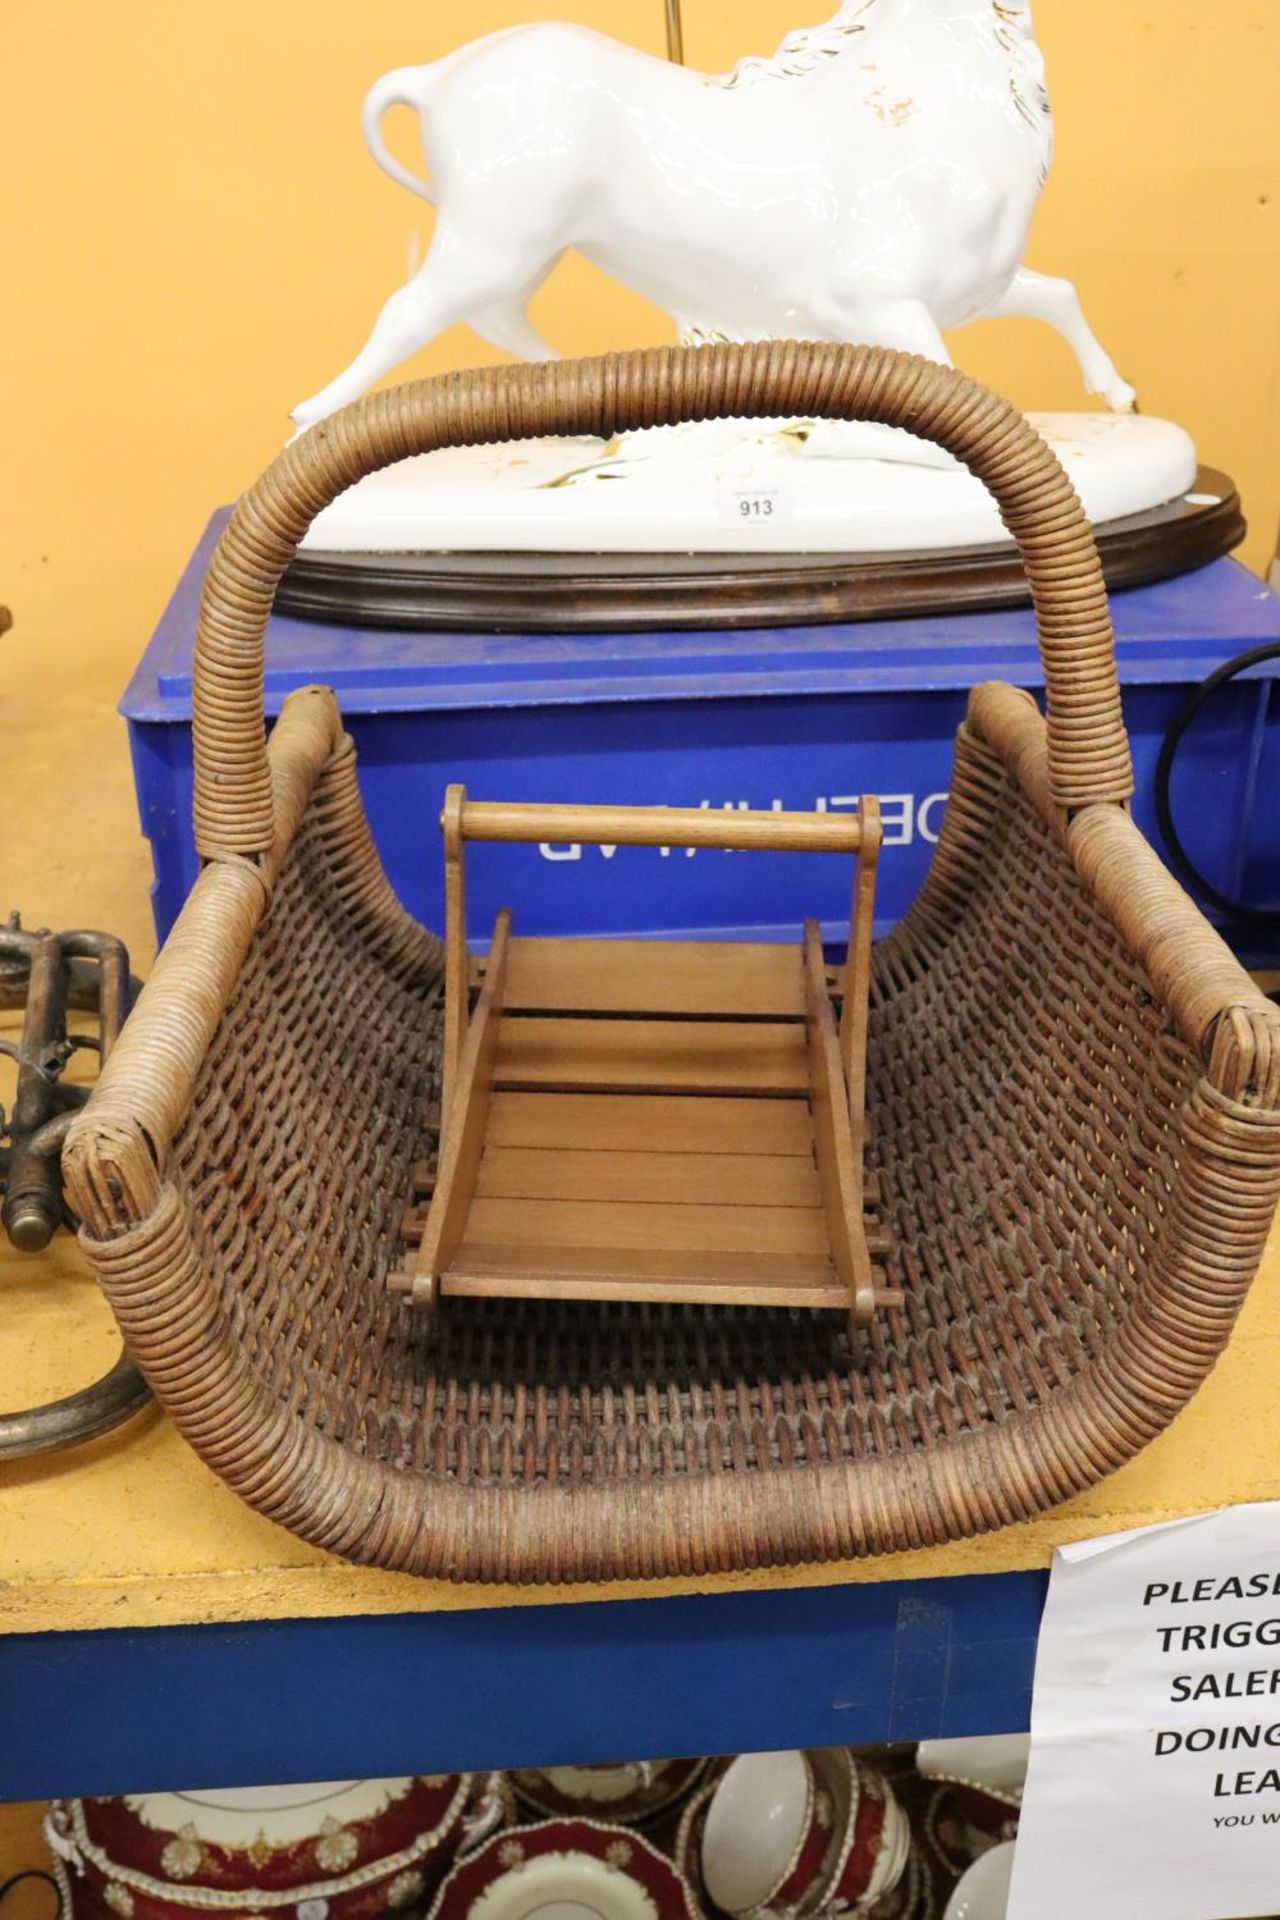 A LARGE BASKET TRUG AND A SMALLER WOODEN ONE